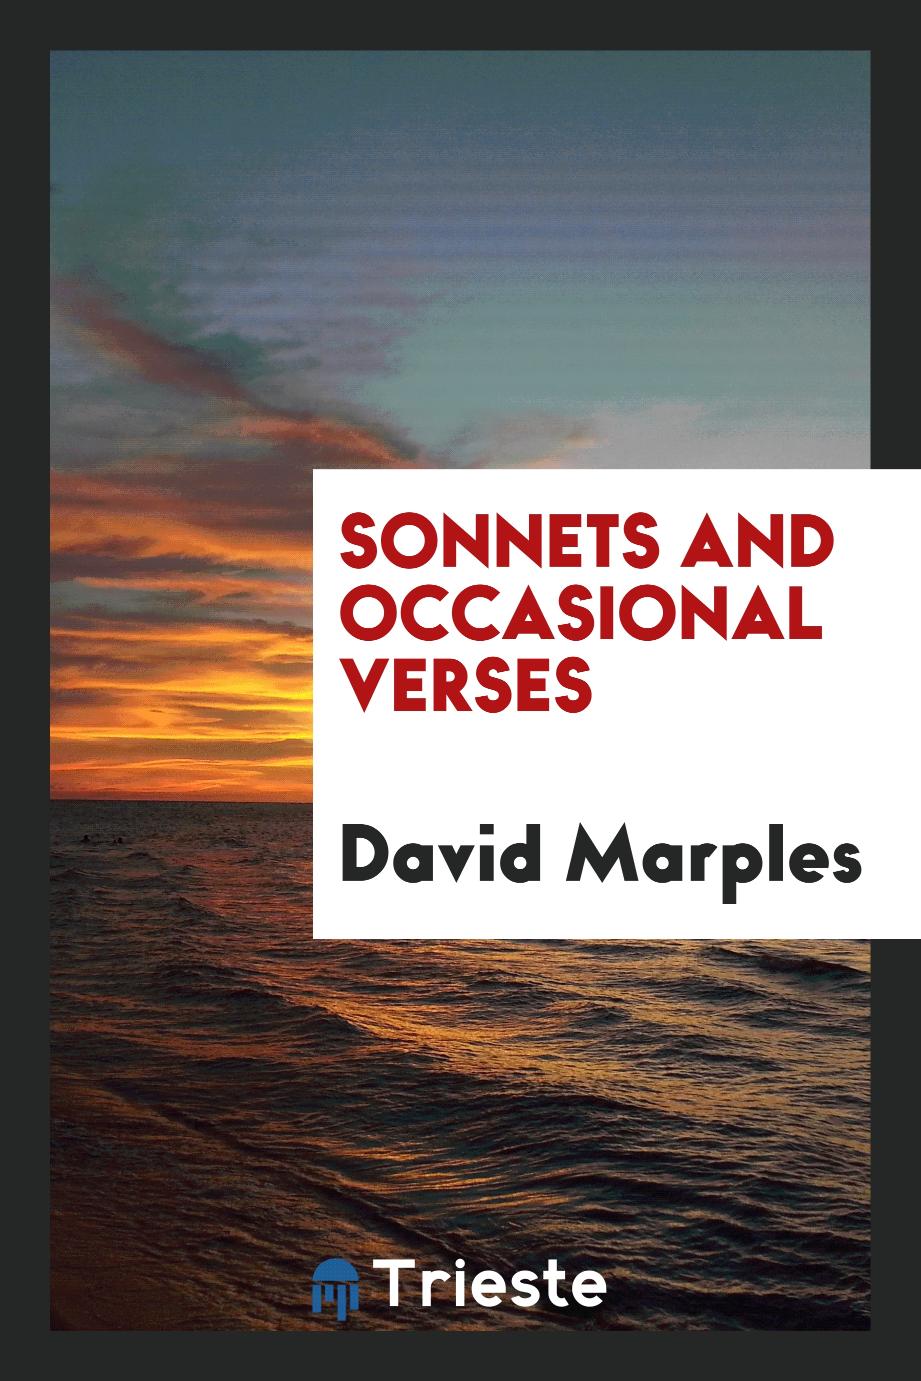 Sonnets and occasional verses